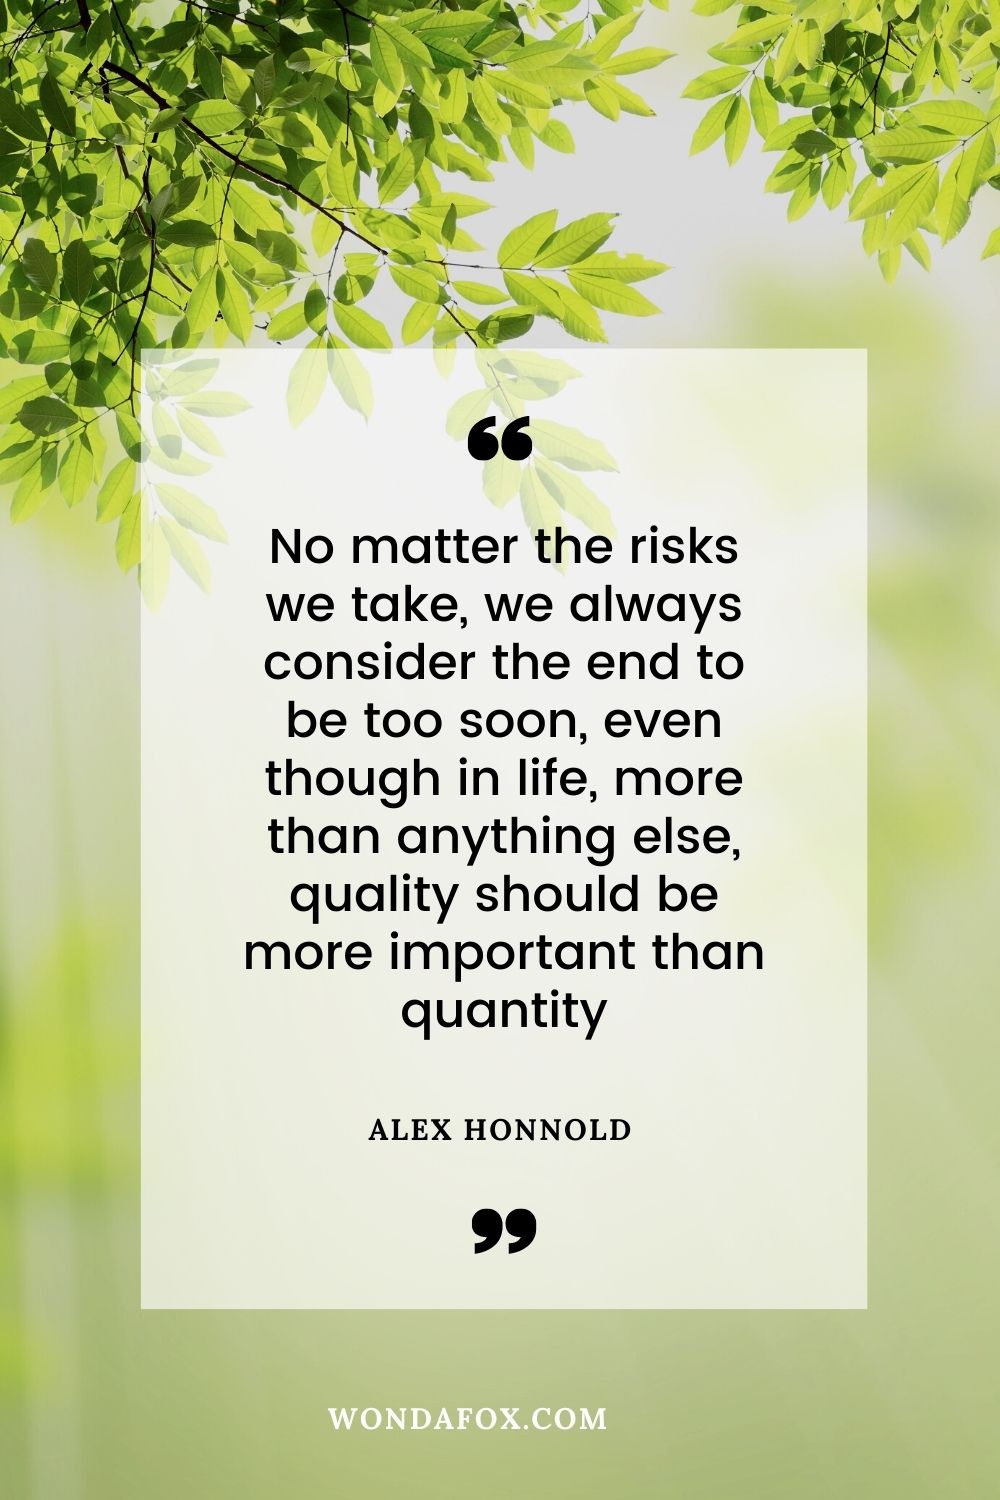 No matter the risks we take, we always consider the end to be too soon, even though in life, more than anything else, quality should be more important than quantity